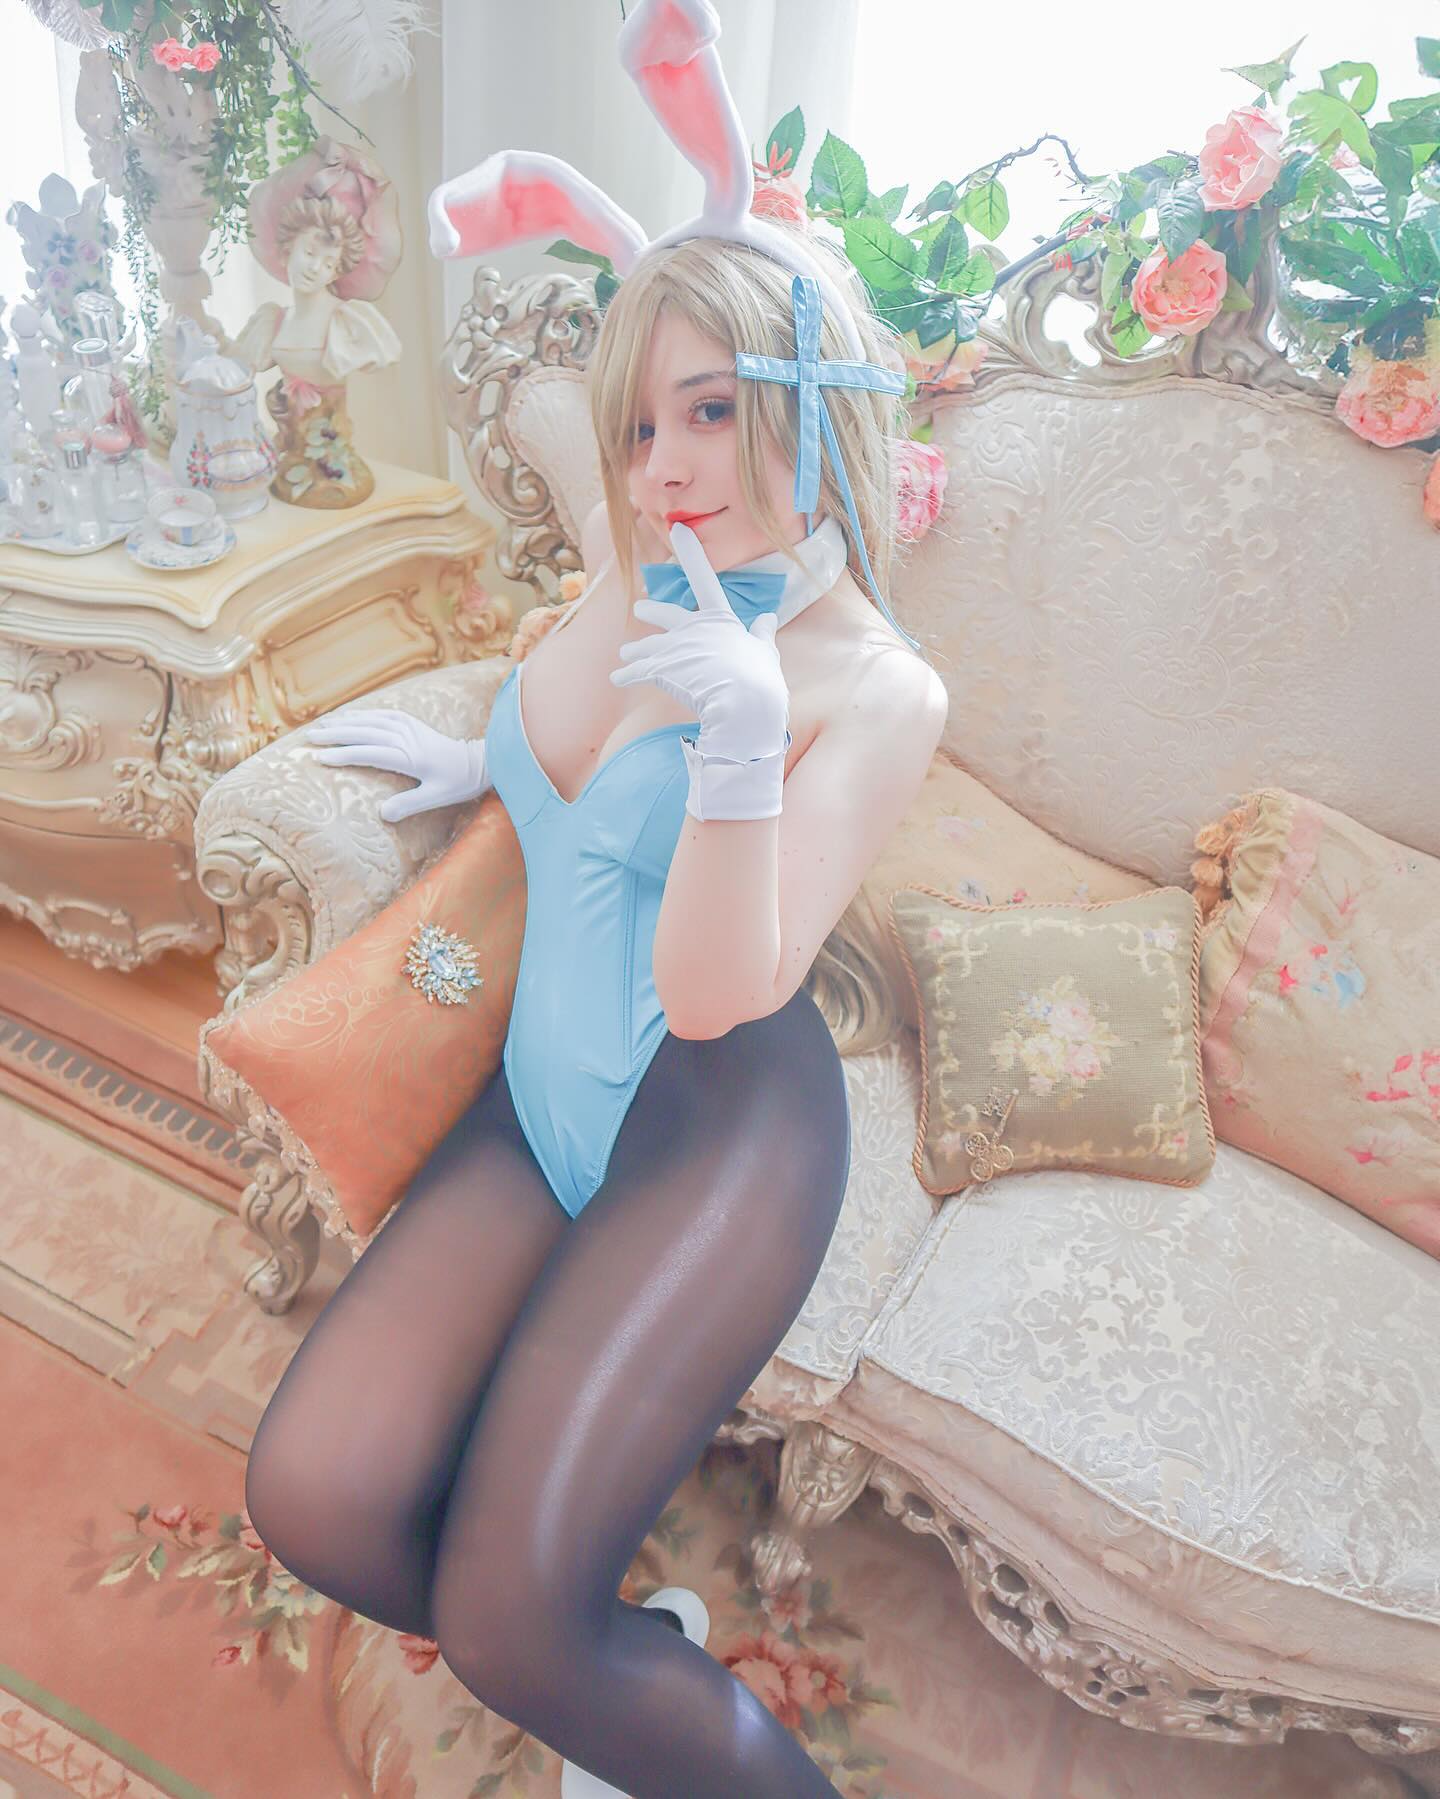 Took a break from concrunching to editing some photos from this amazing location photoshoot this place was next level for real 

Studio: @boutiquephotoloft 

#cosplaygirl #animecosplay #bluearchive #bunnysuit #cosplay #animelife